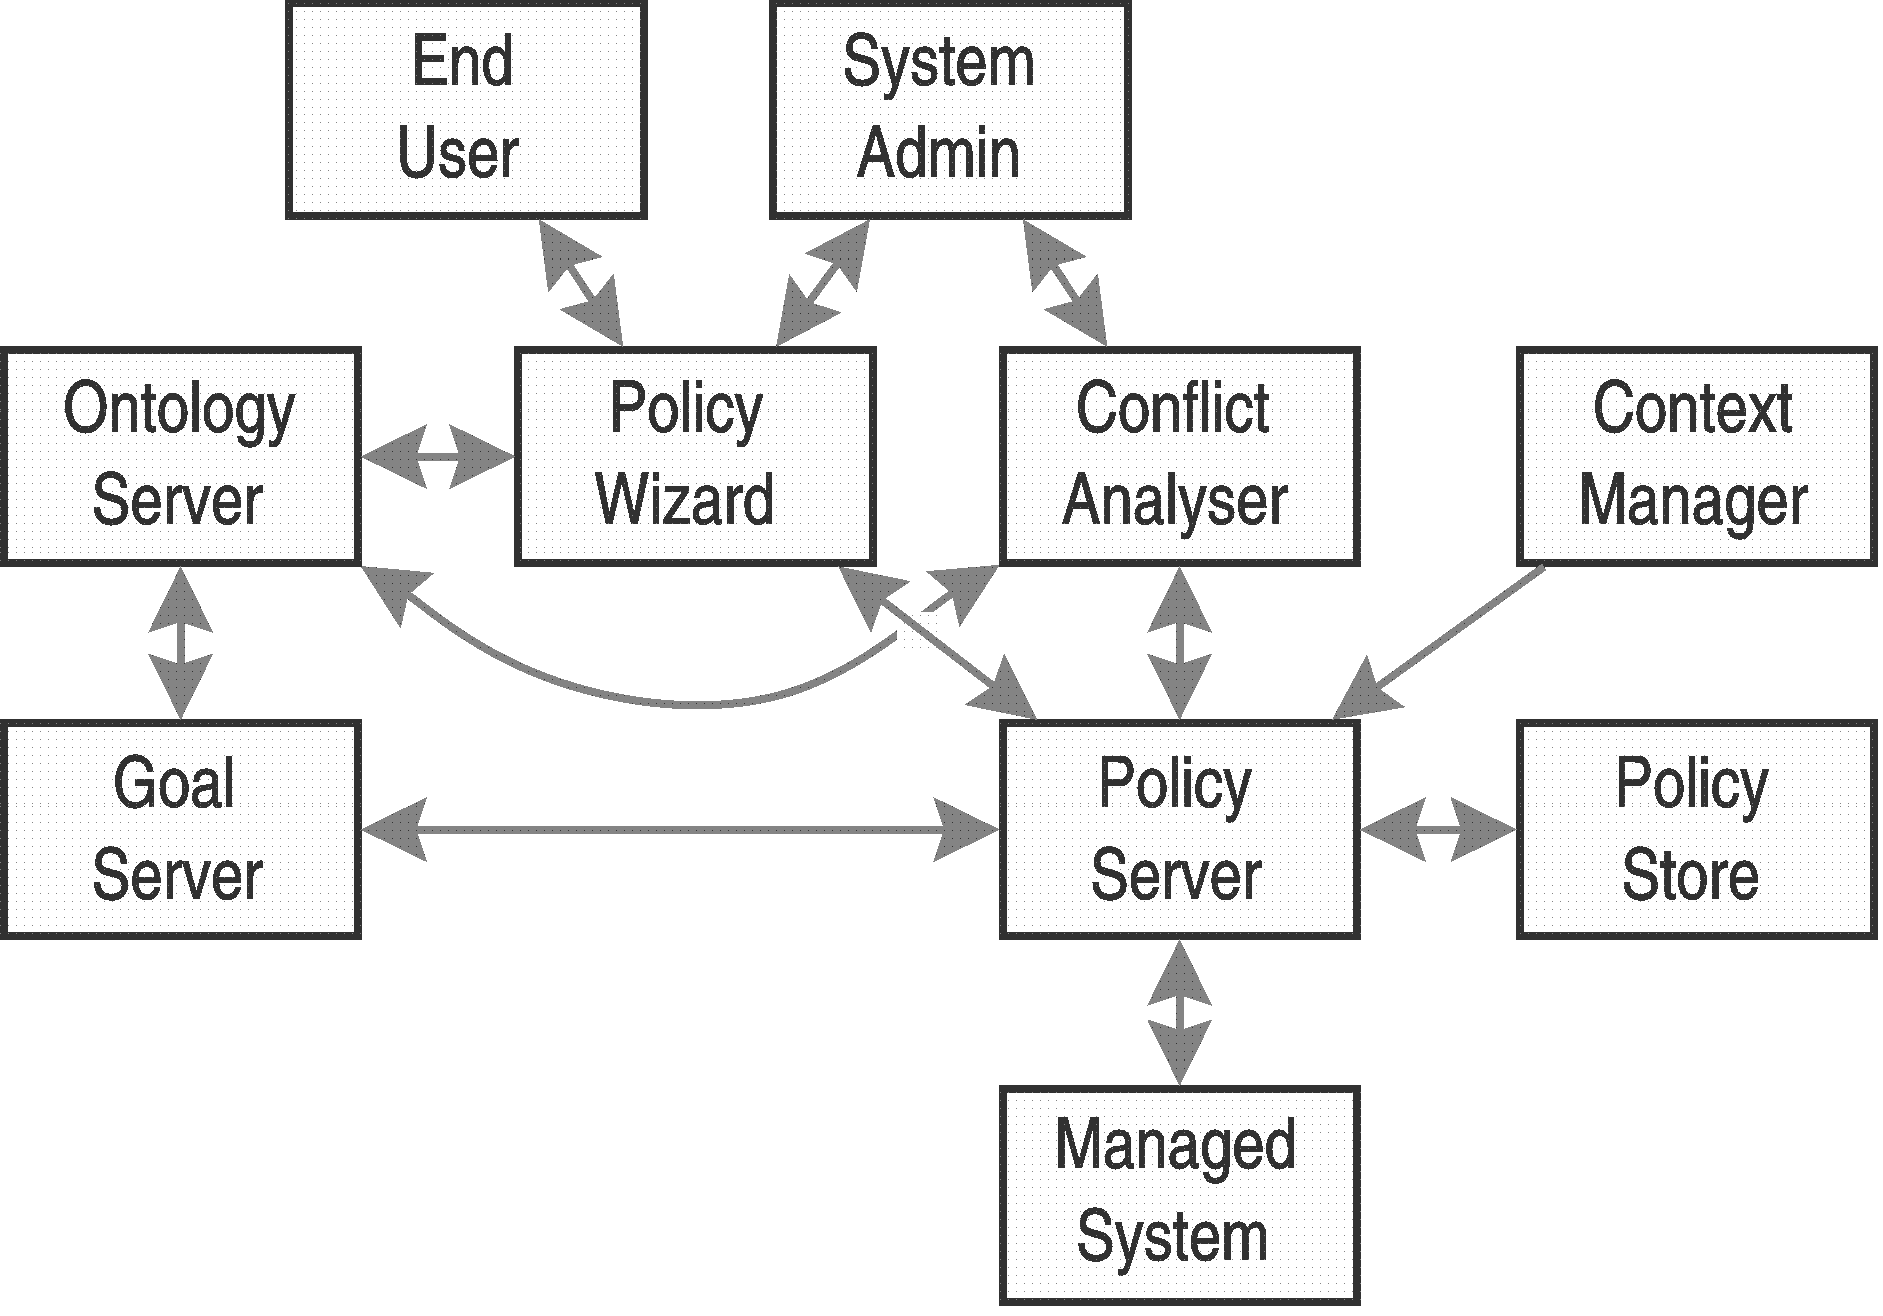 General System Architecture